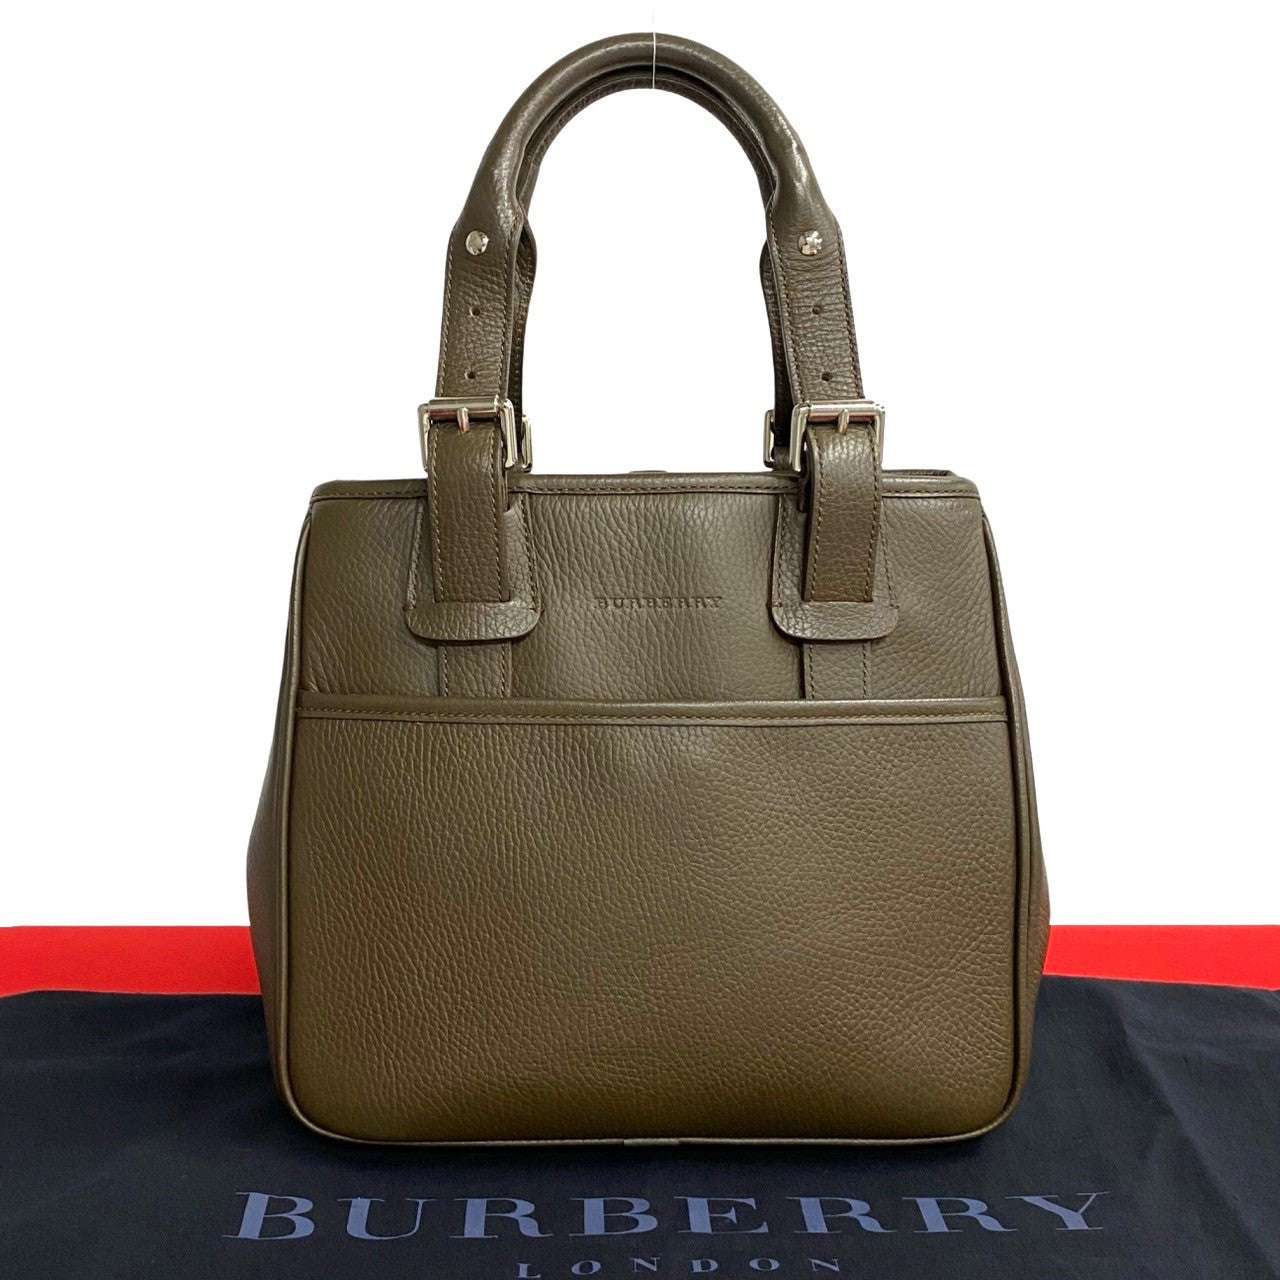 Burberry Leather Mini Tote Bag Leather Tote Bag 46120 in Good condition